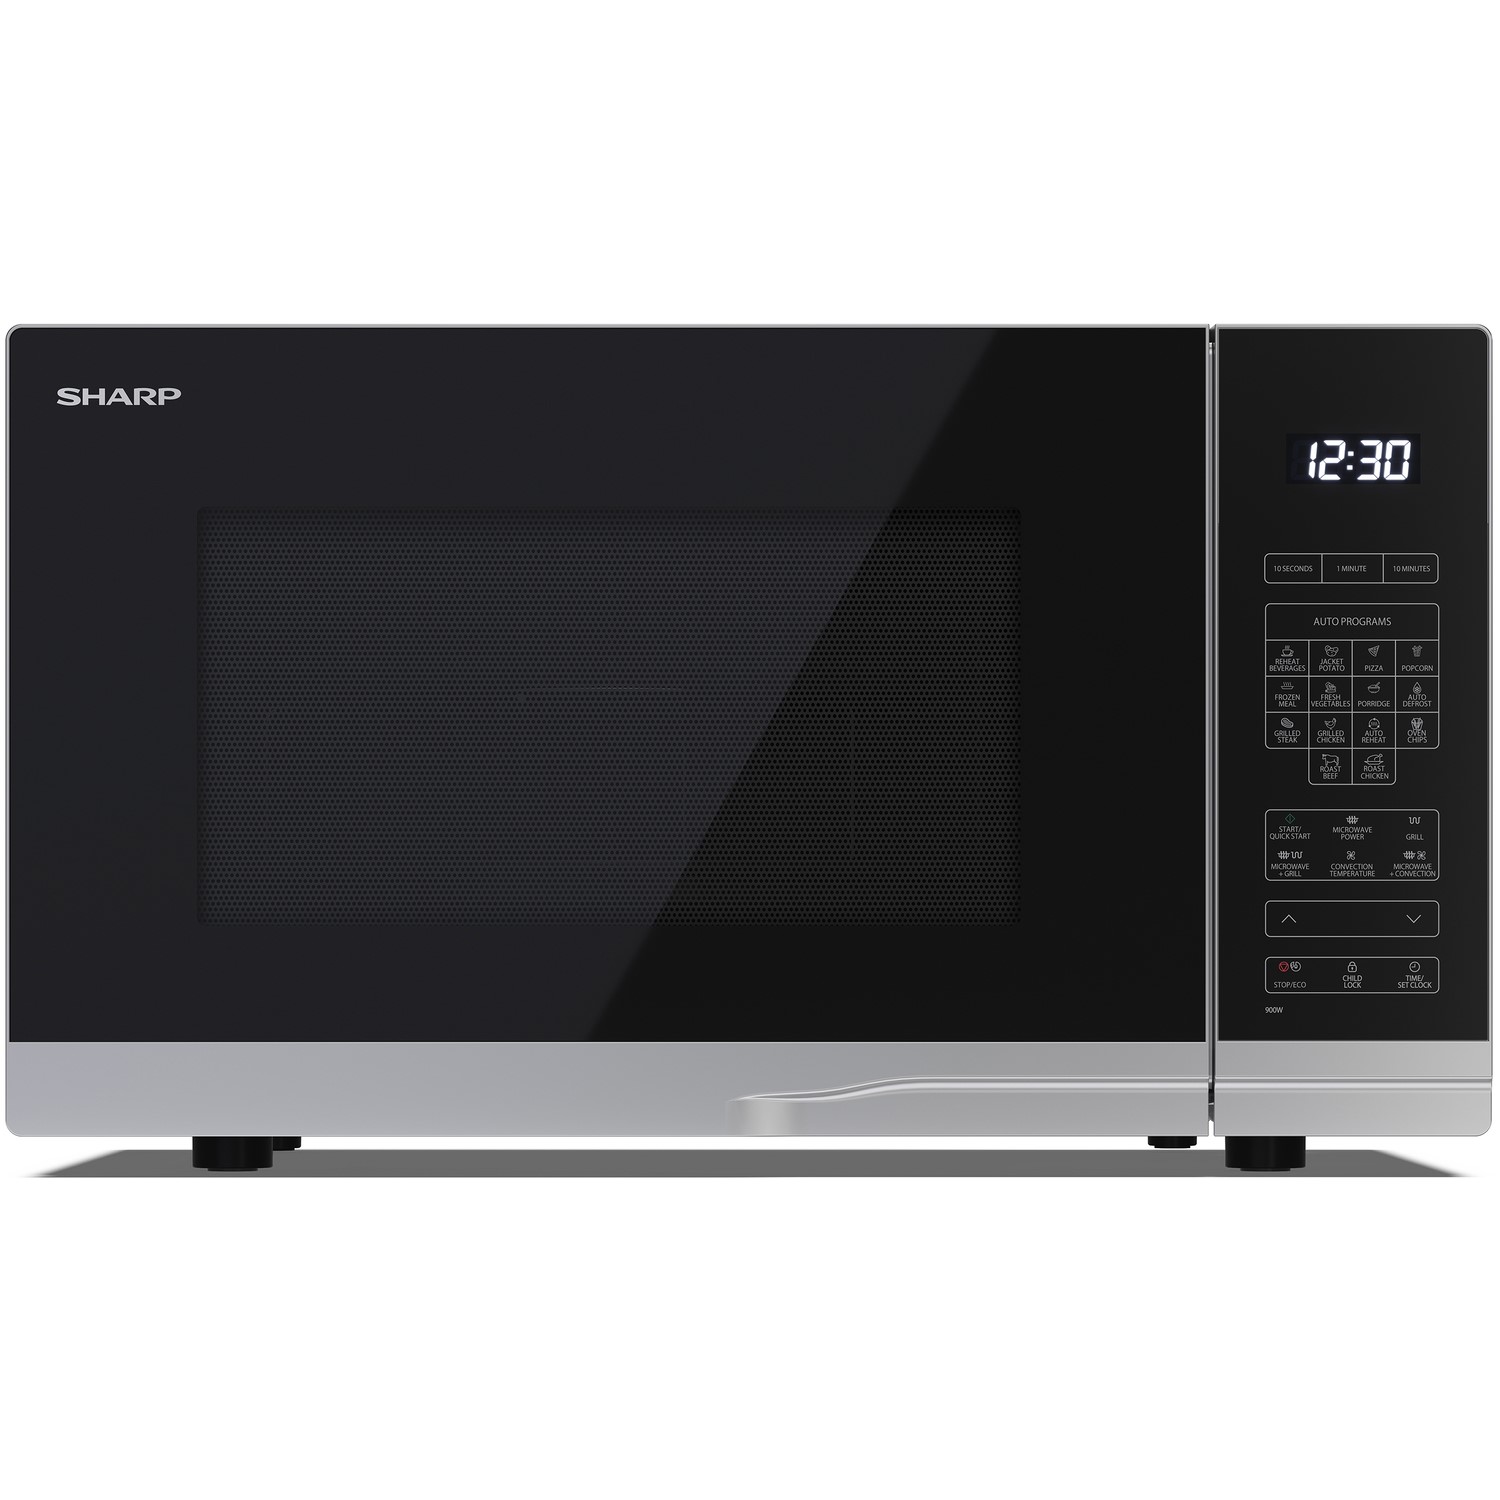 Photos - Other for Computer Sharp YCPC322AUS 32L 1000W Digital Combination Microwave - Silver YC-PC322 